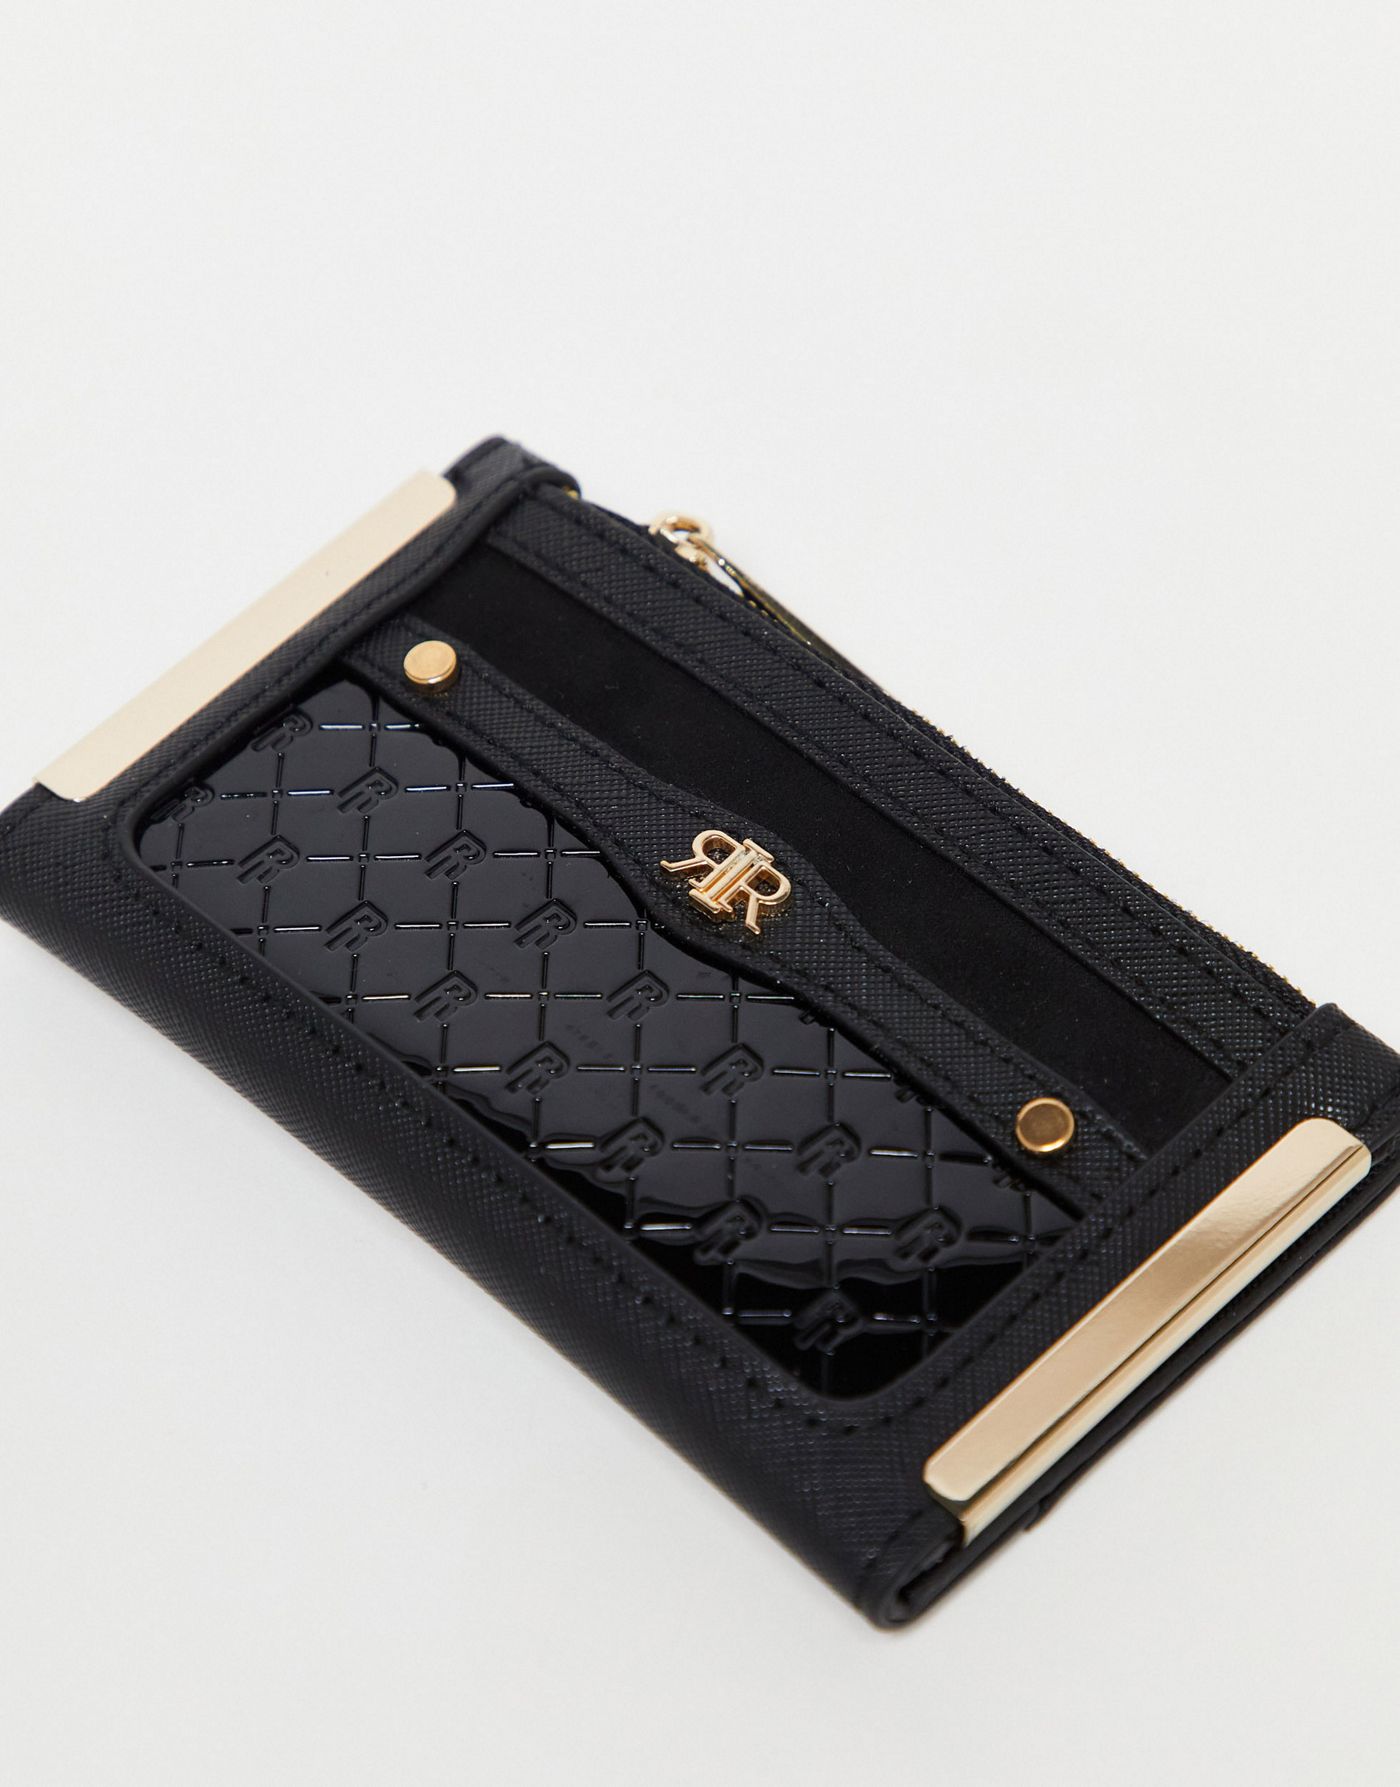 River Island embossed patent purse in black